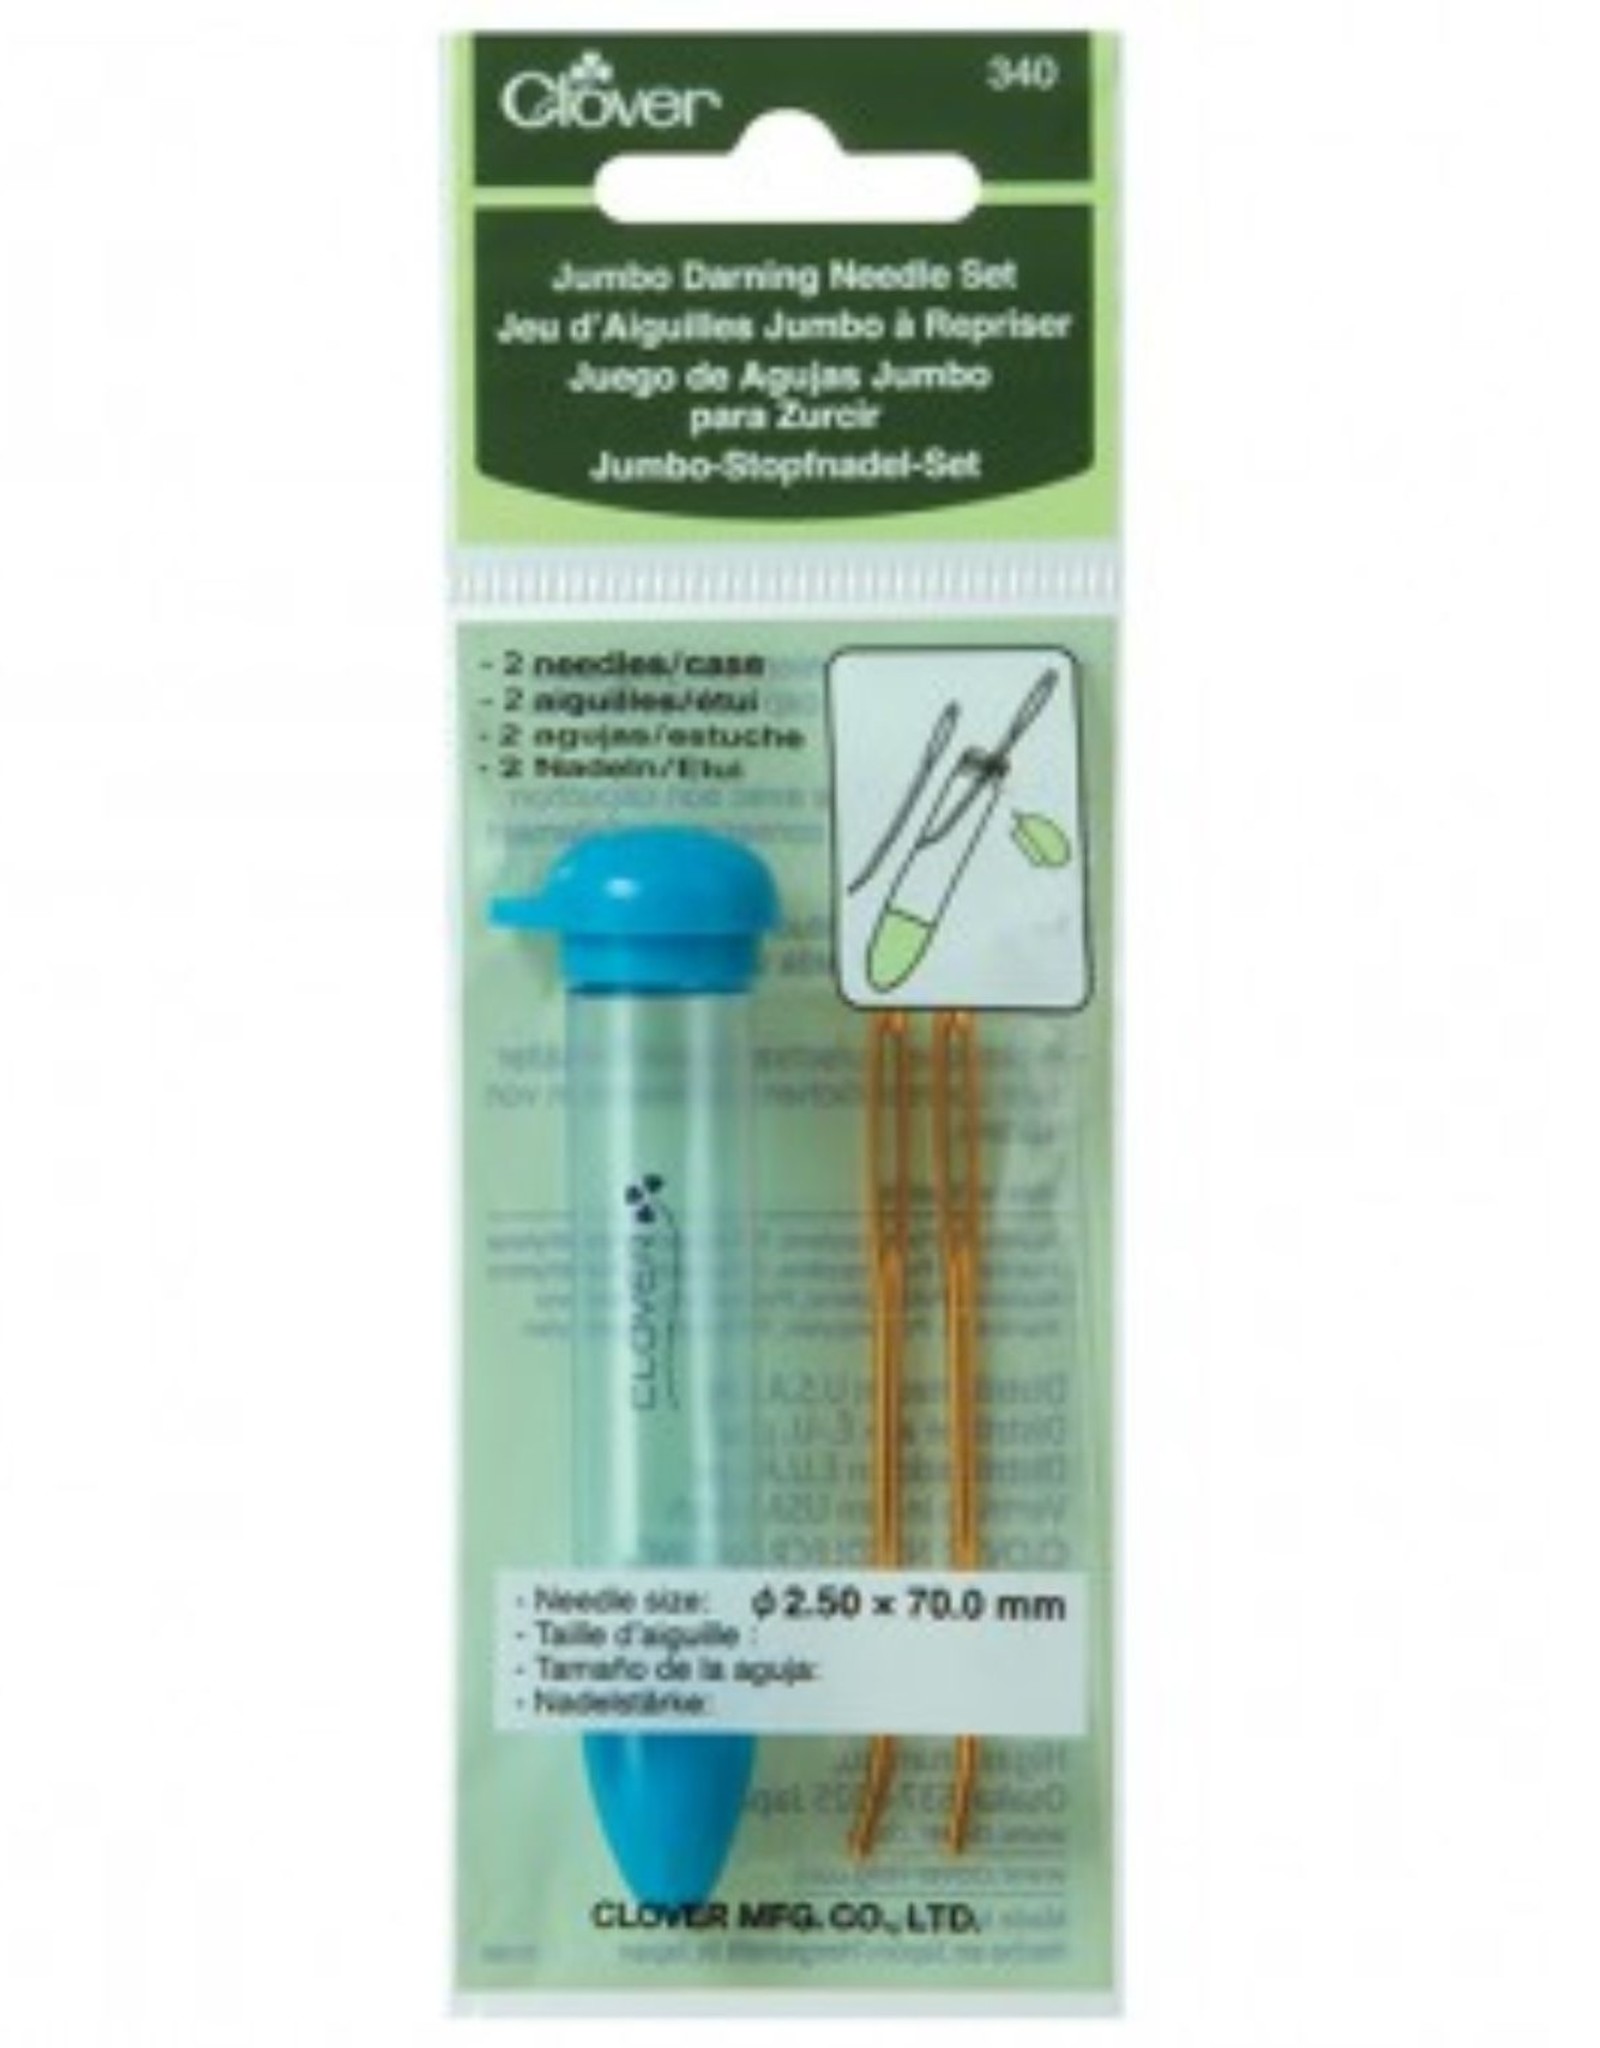 Clover Jumbo Bent Point Darning Needle - set of 2 in clear tube